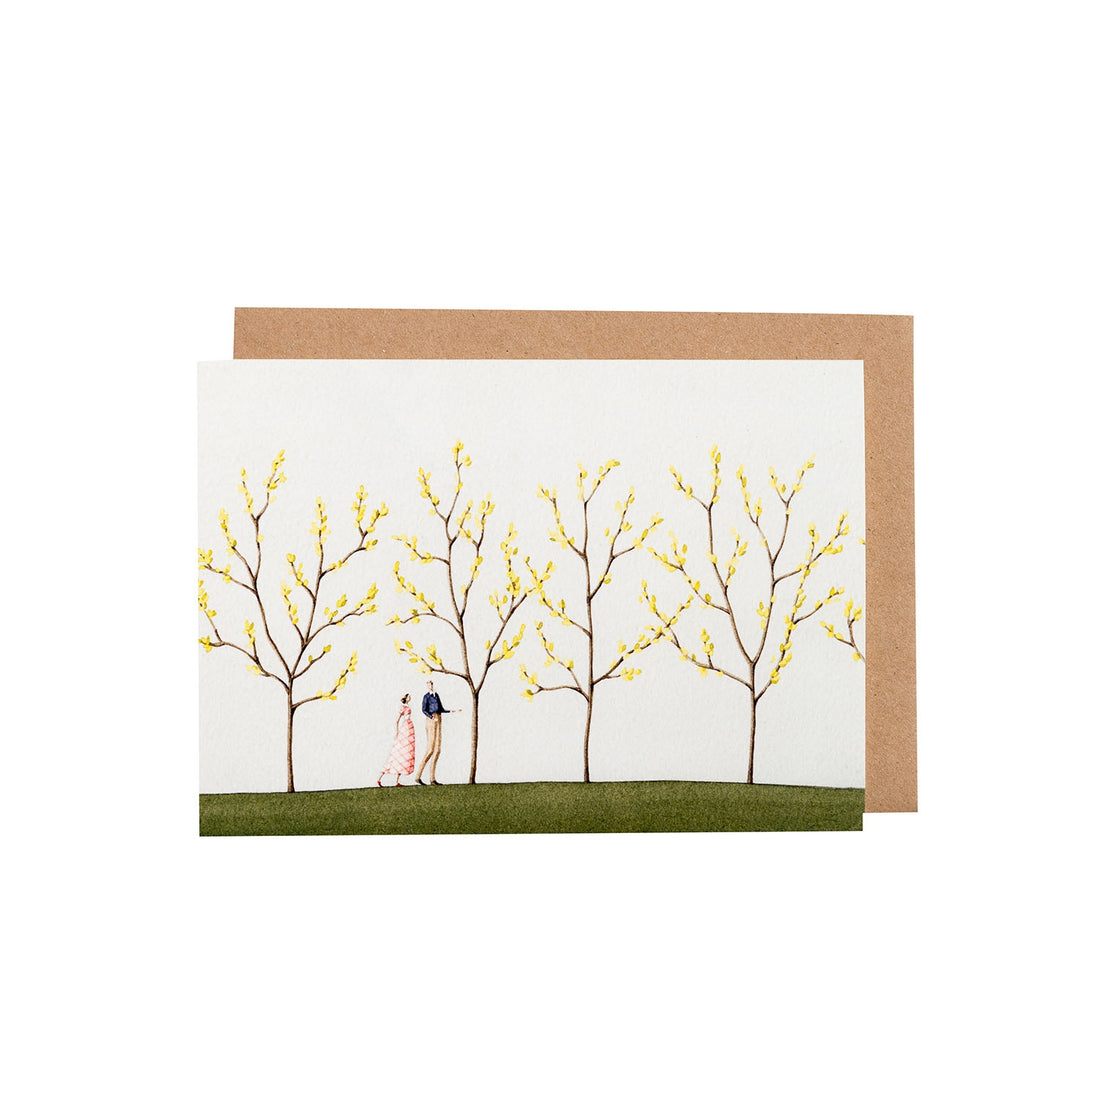 An Hester &amp; Cook Spring Walk Greeting Card featuring an illustration of a couple in a park surrounded by trees. The intricate artwork adds a touch of elegance to this heartwarming card.